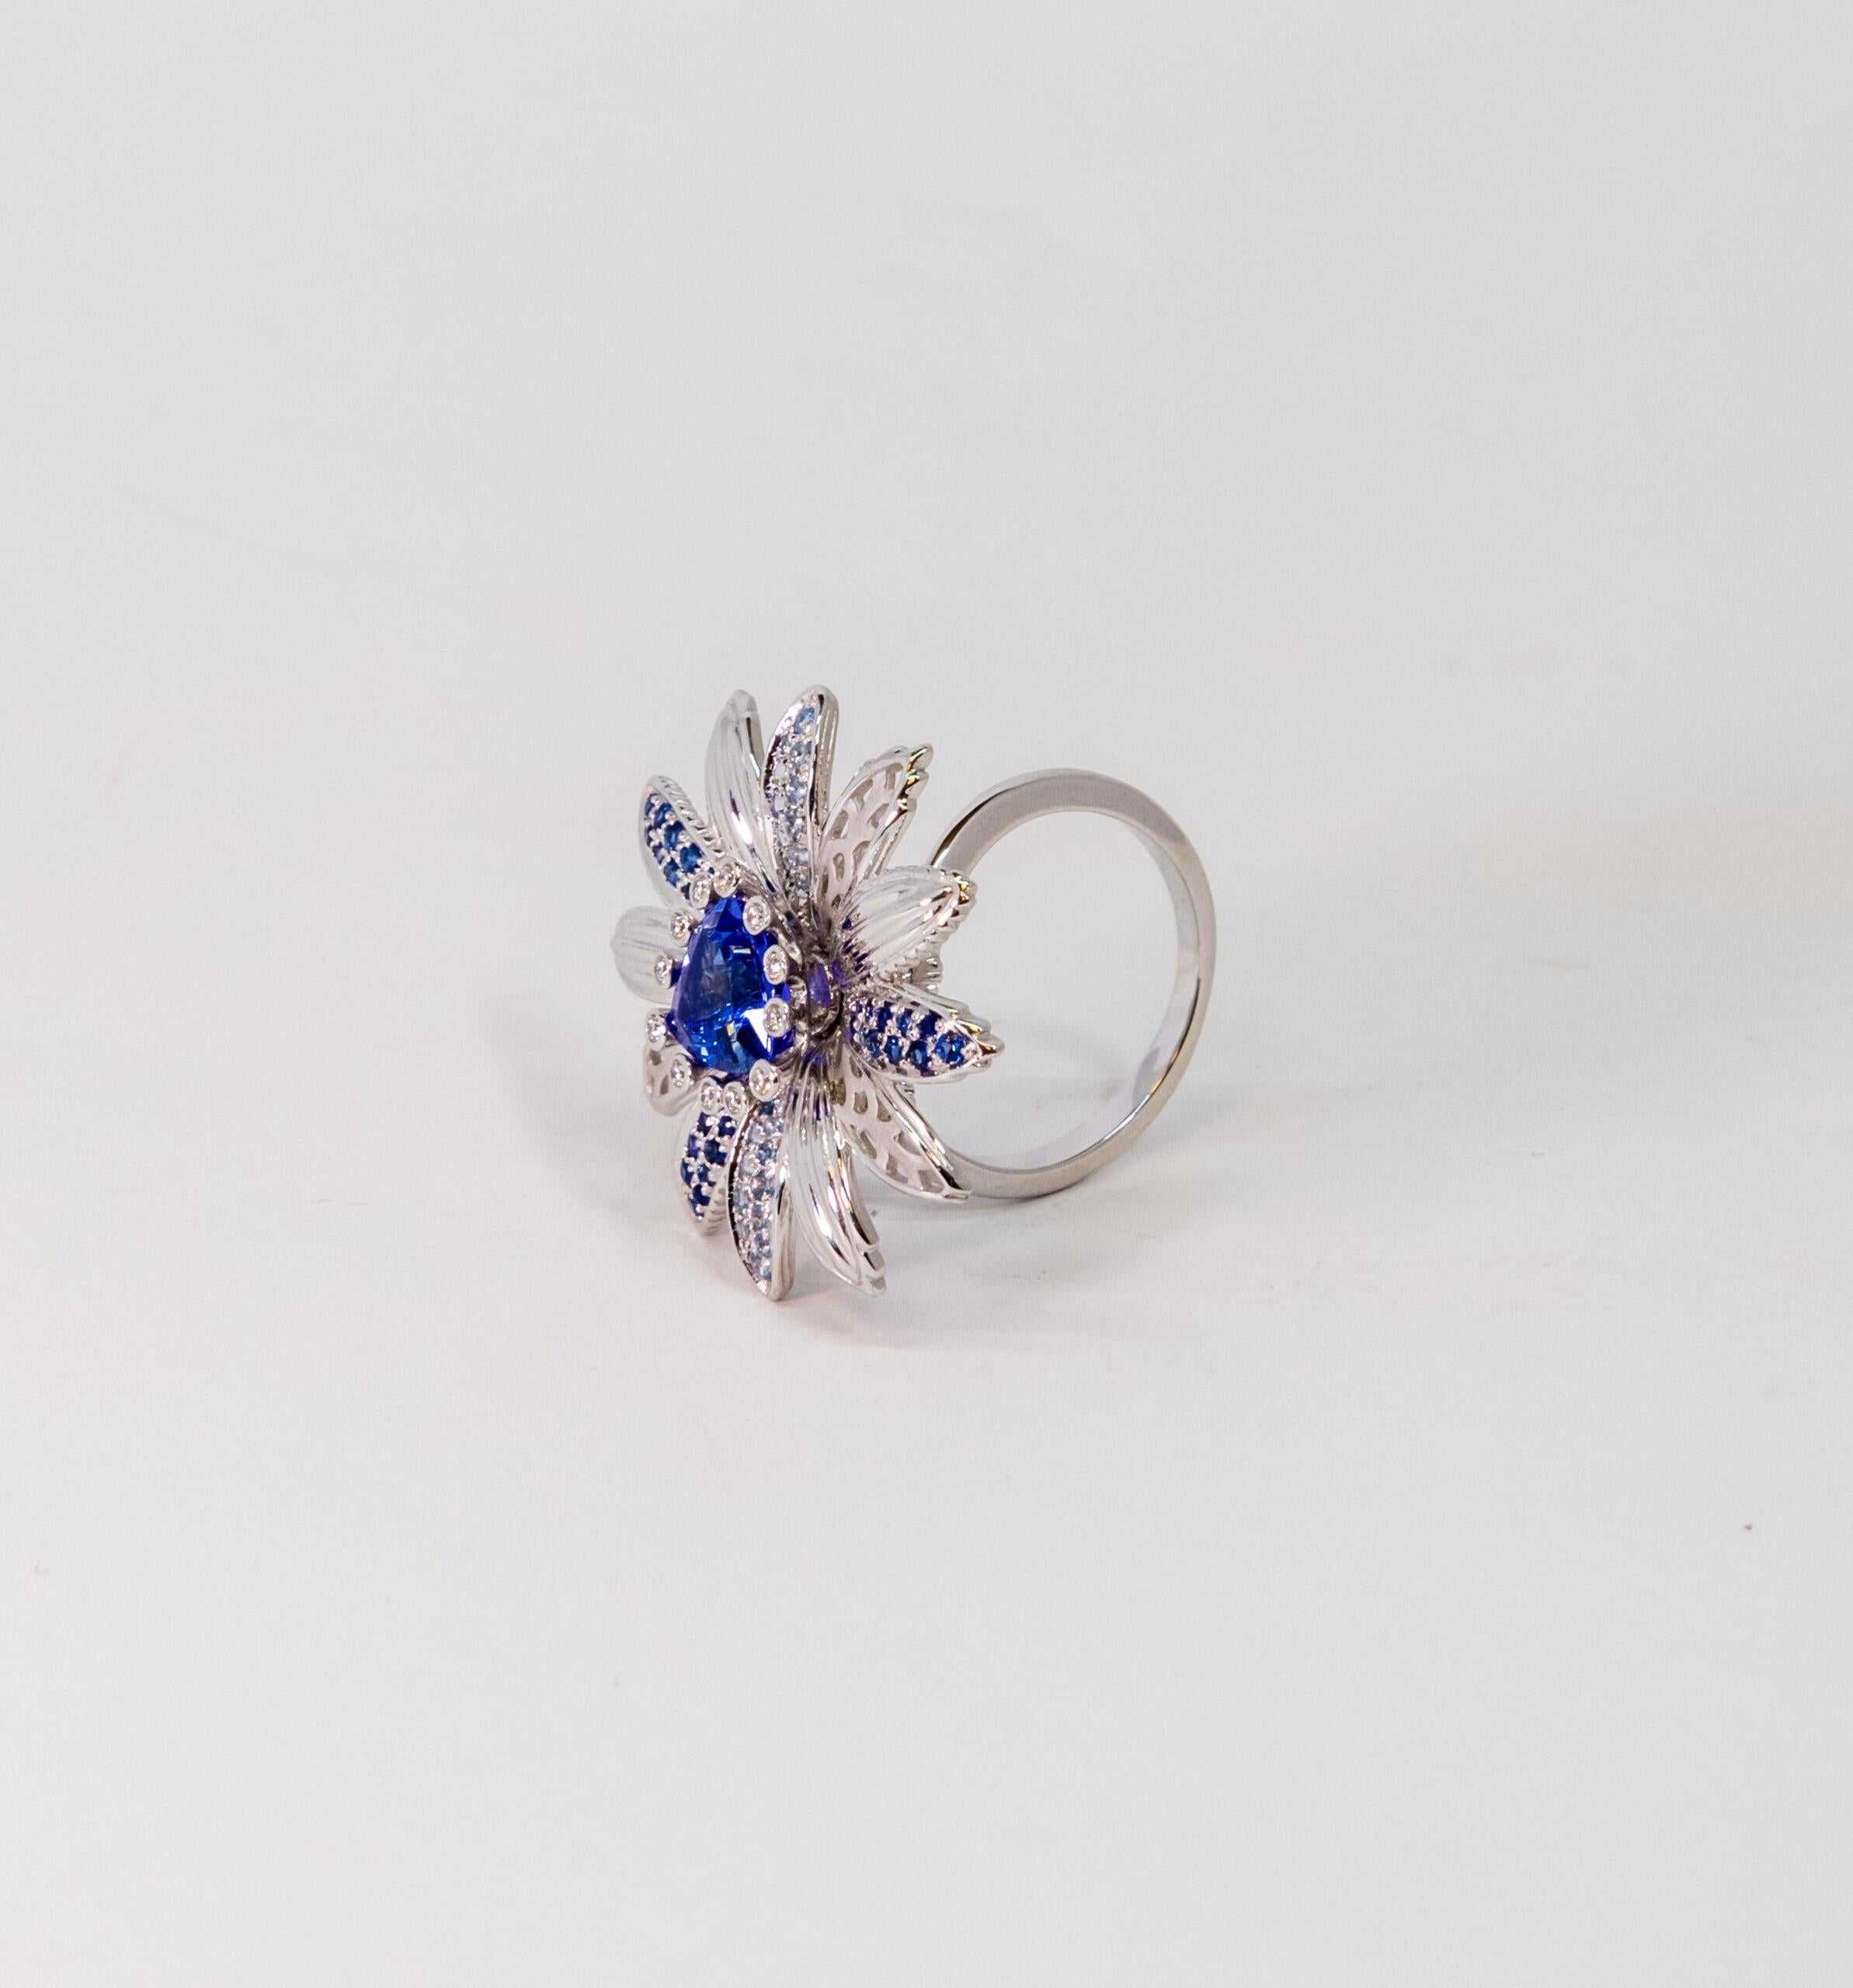 10070335 Carrera y Carrera  
This ring is made of 18K White Gold. The flower-shaped front side is decorated with triangle-cut main Blue Sapphire stone and light blue and dark blue side stones on petals totaling ~2.06ct. Main stone is surrounded by